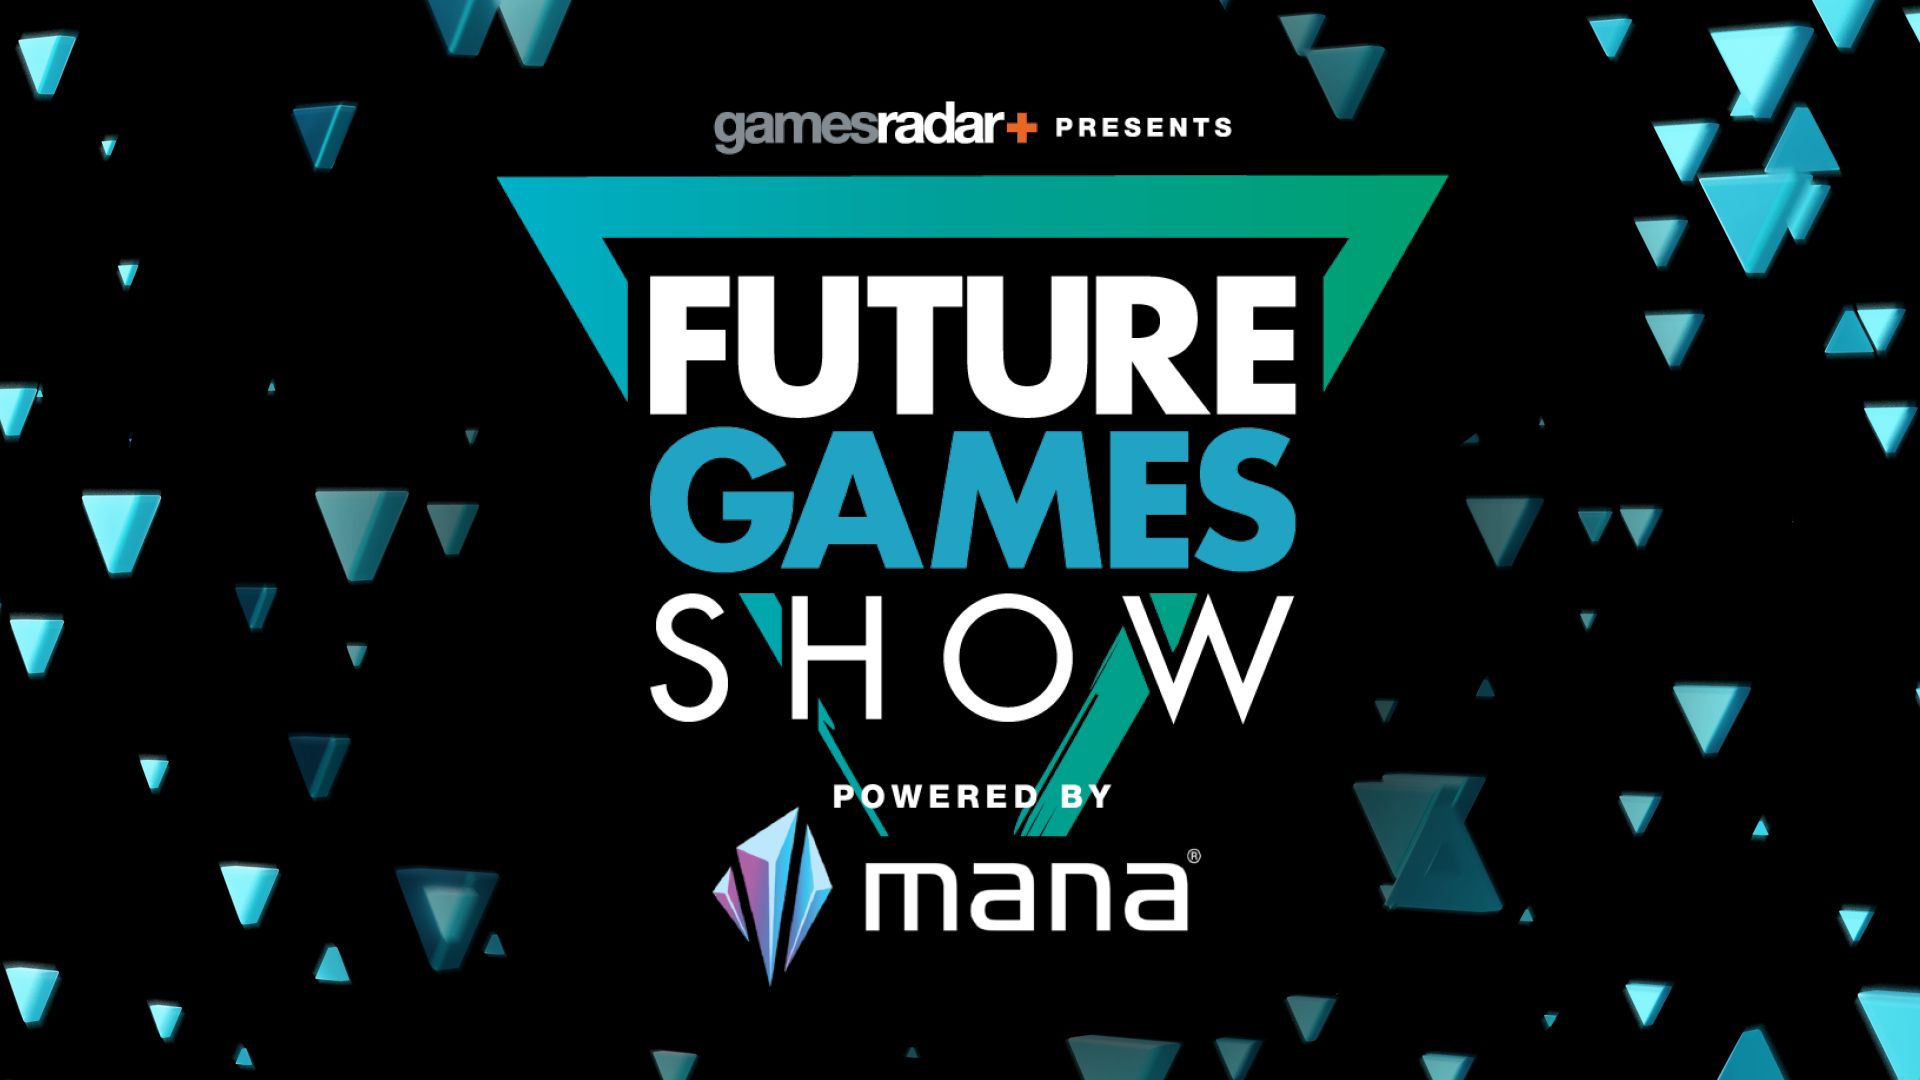 Everything Announced at The Future Games Show at gamescom Powered by Mana on August 24